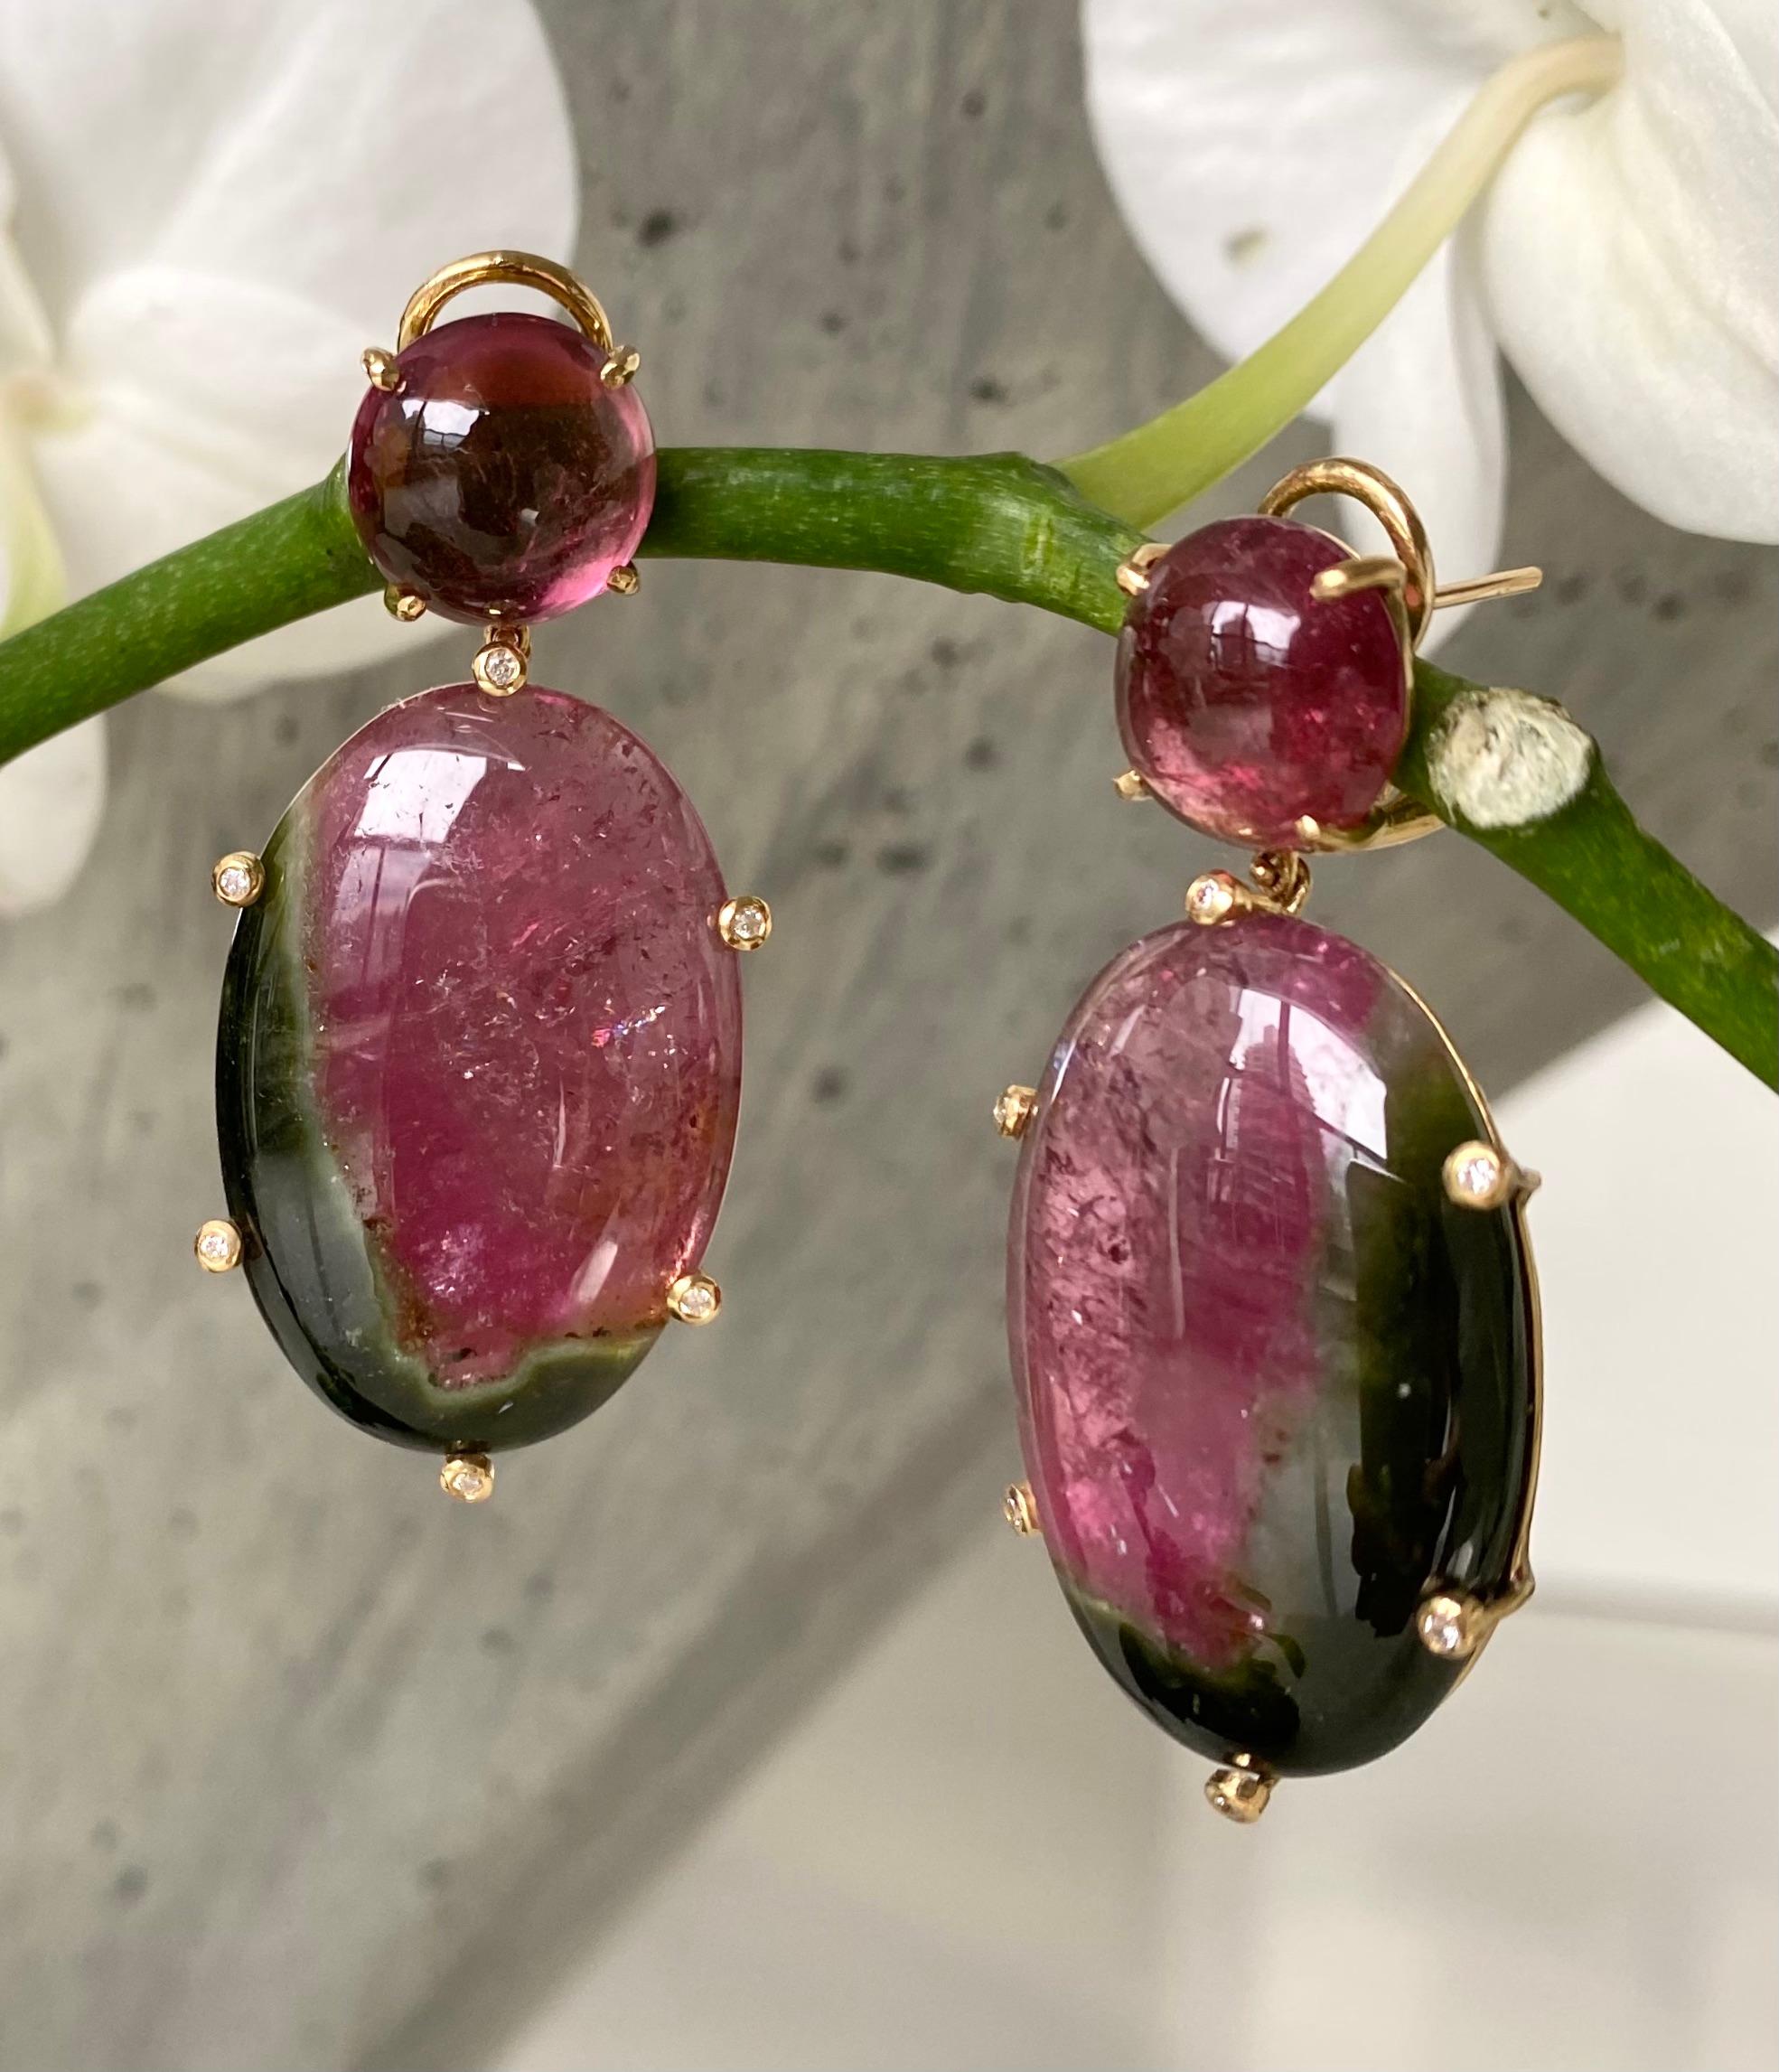 Earrings of round cabochon pink tourmalines and oval watermelon tourmaline drops with diamond accents, handcrafted in 18 karat yellow gold.

These gorgeous one-of-a-kind watermelon tourmaline dangle earrings are perfect for the spring and summer